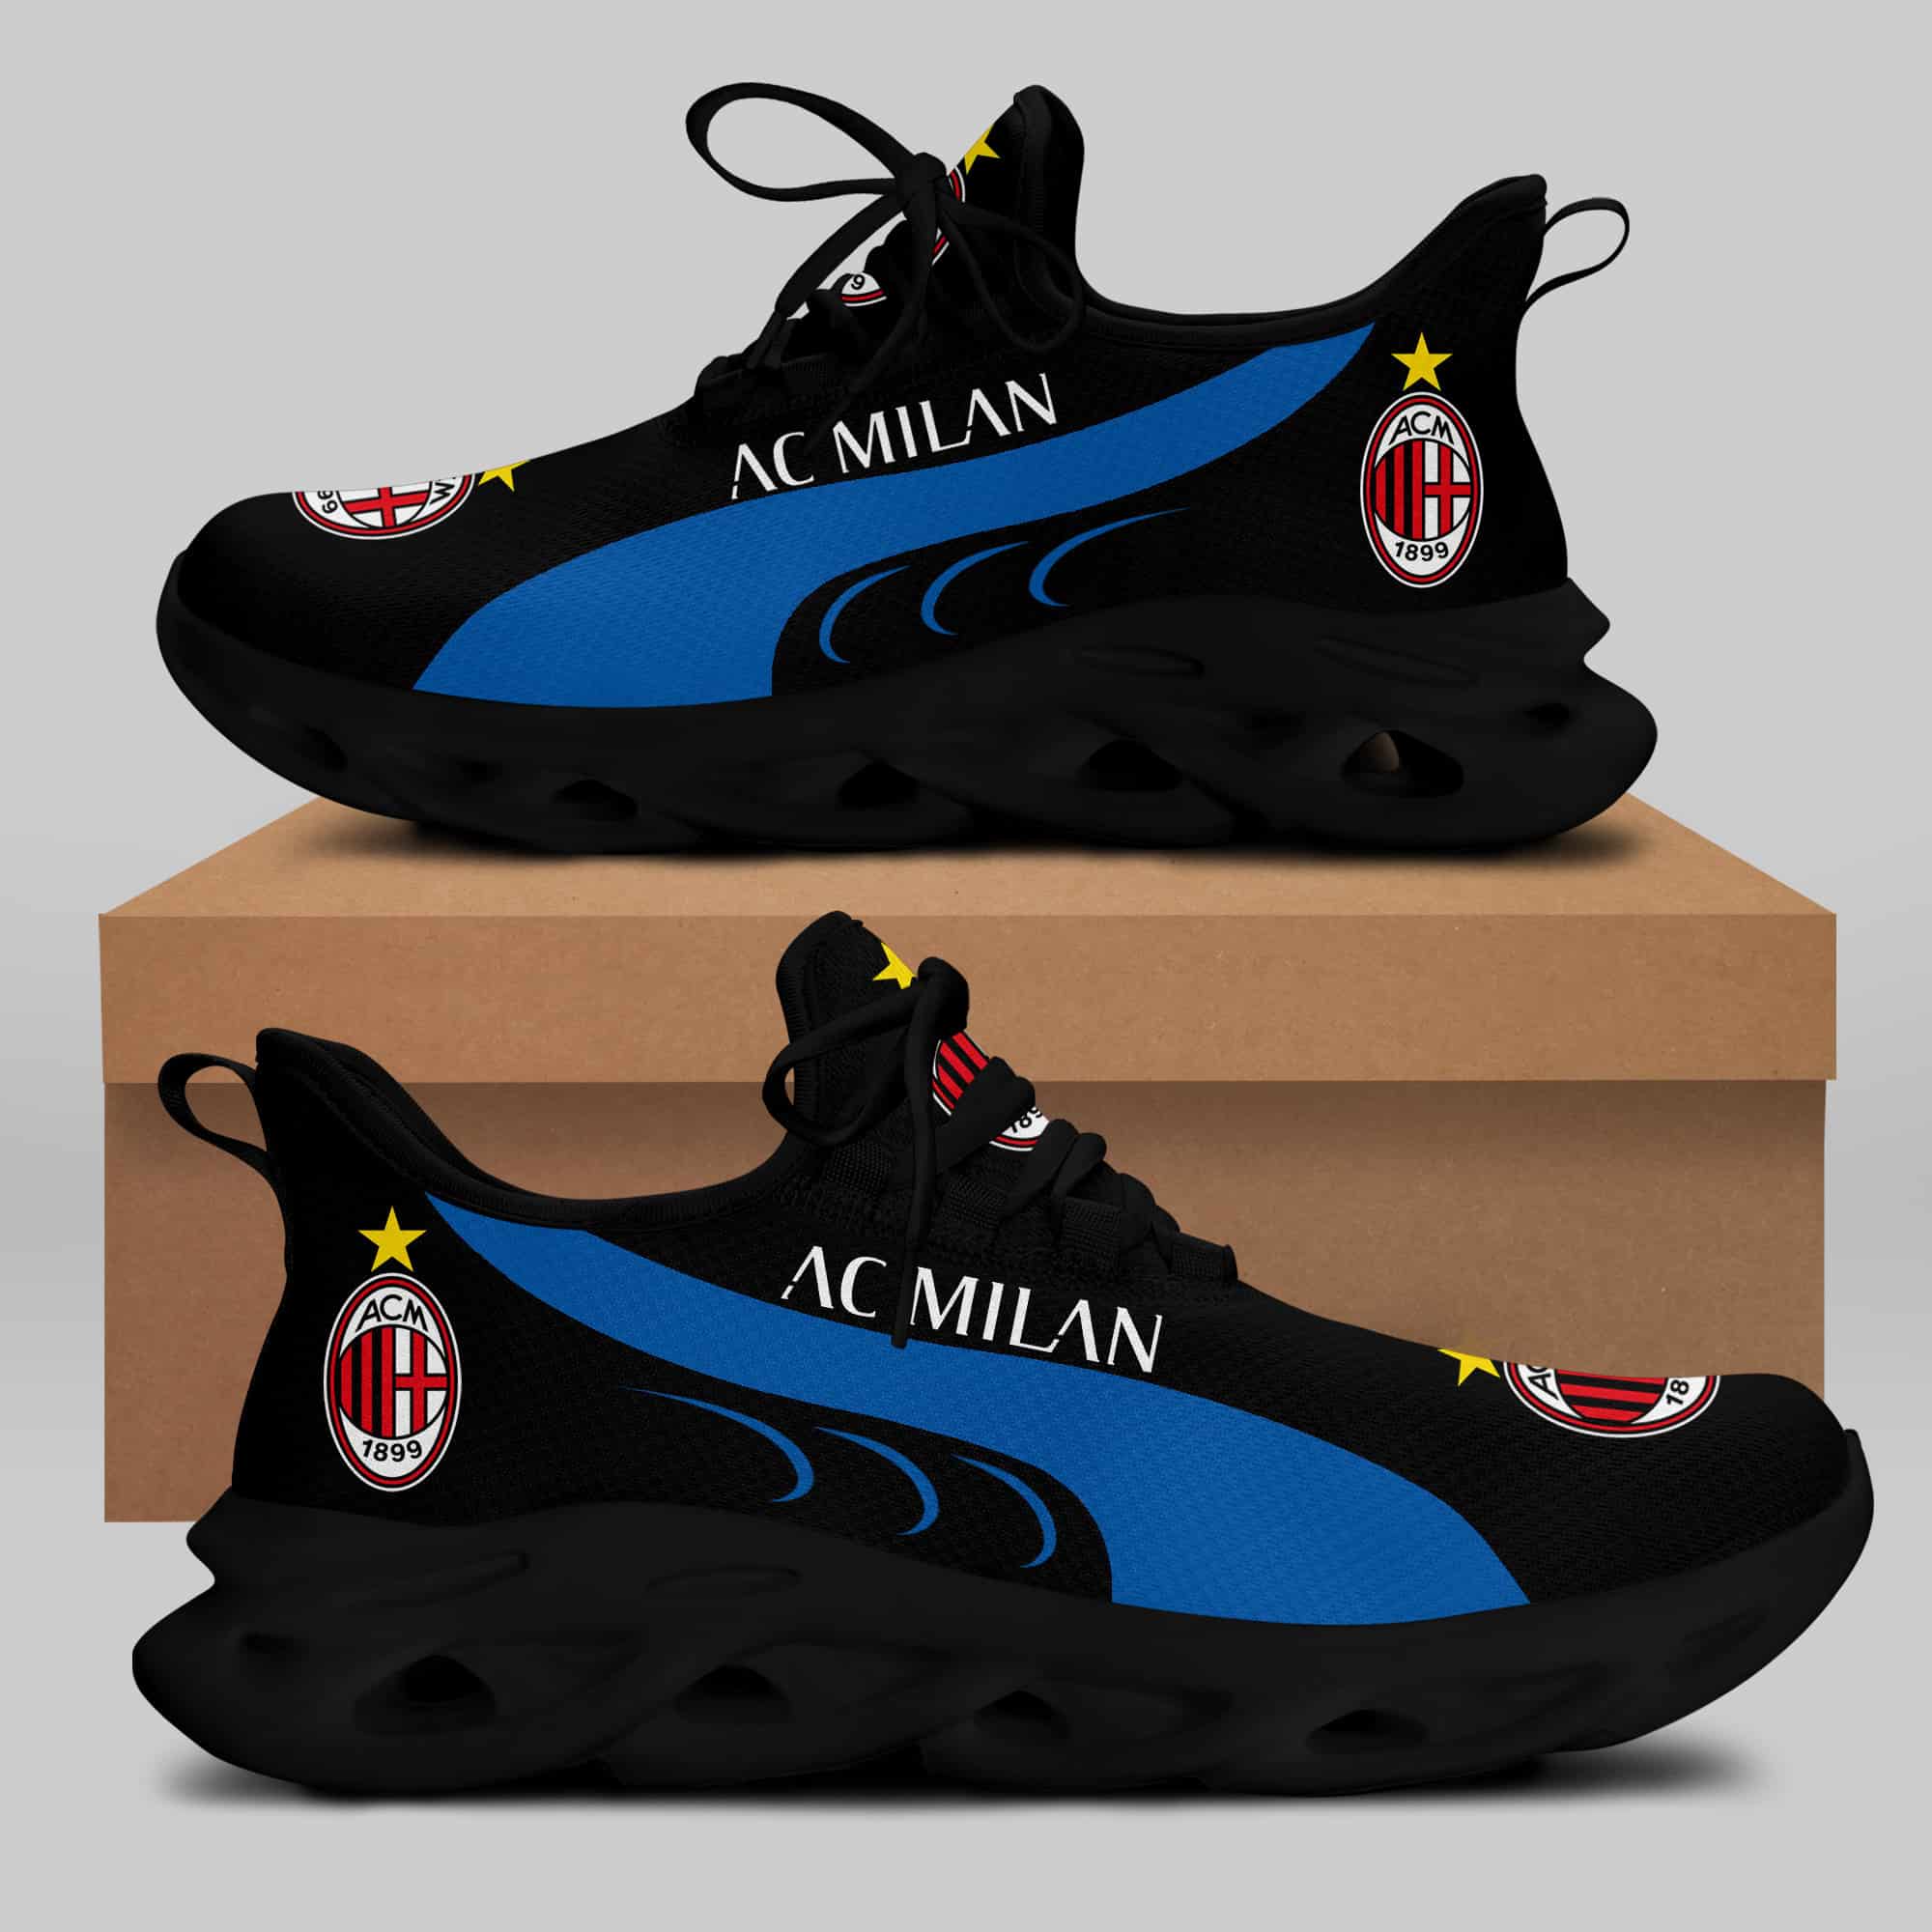 Ac Milan Running Shoes Max Soul Shoes Sneakers Ver 8 1